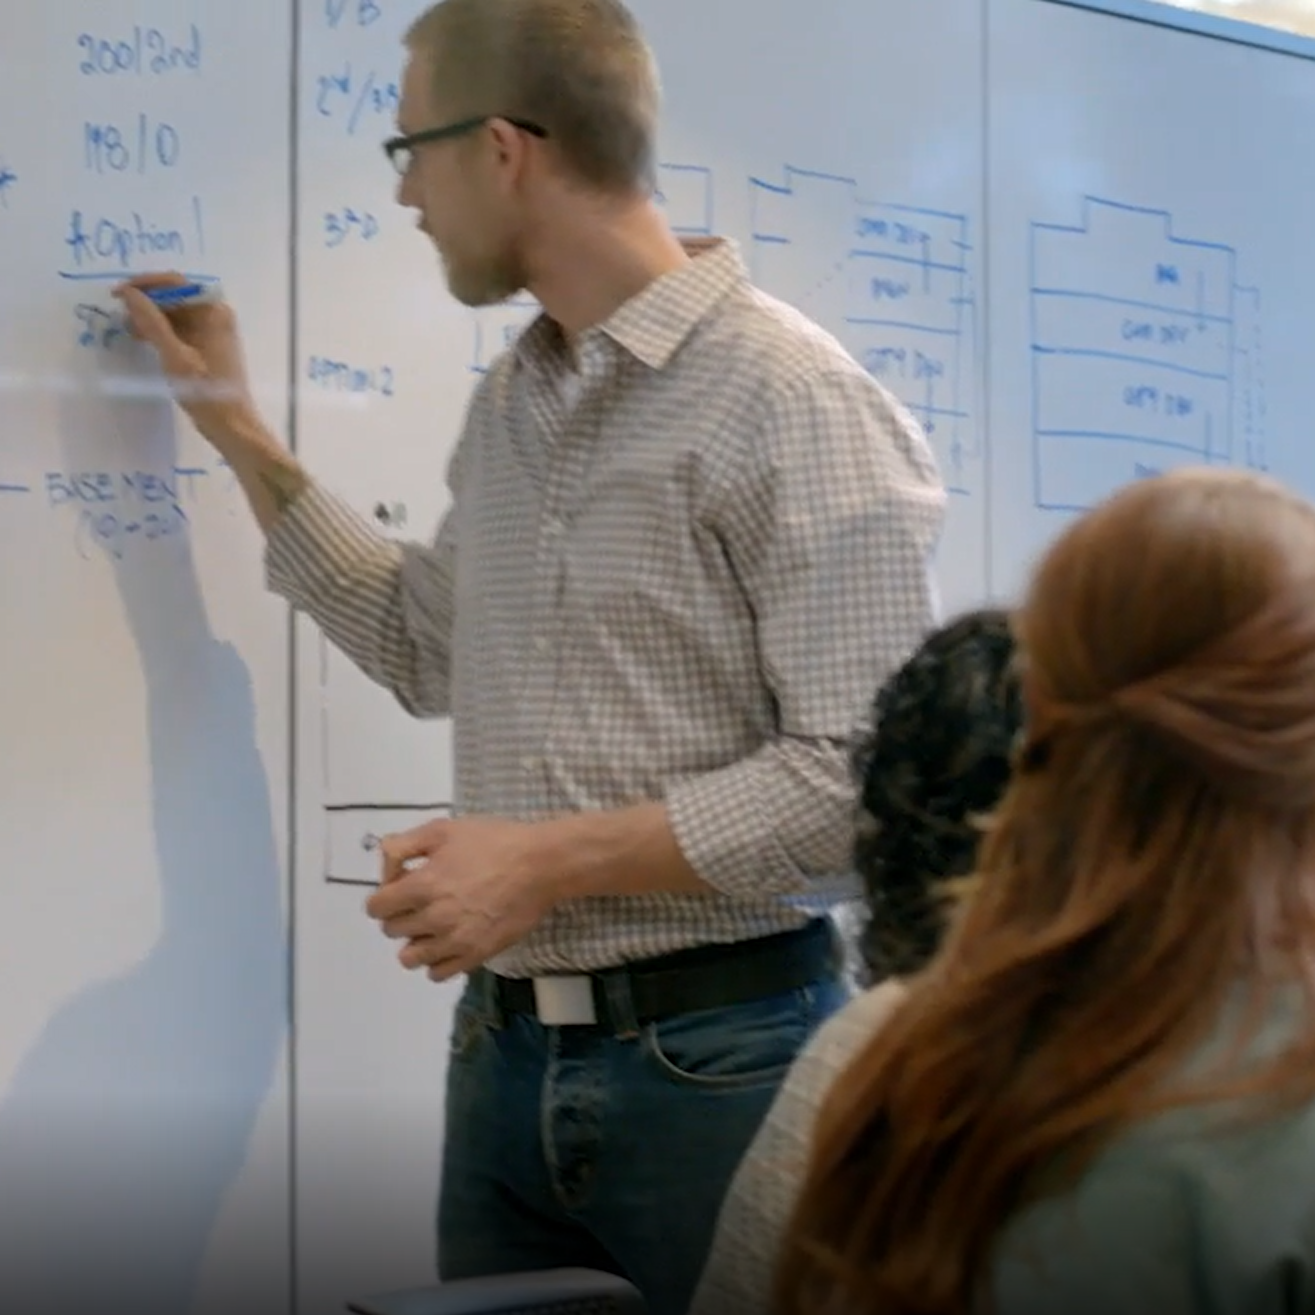 Scientist writes equation on whiteboard.